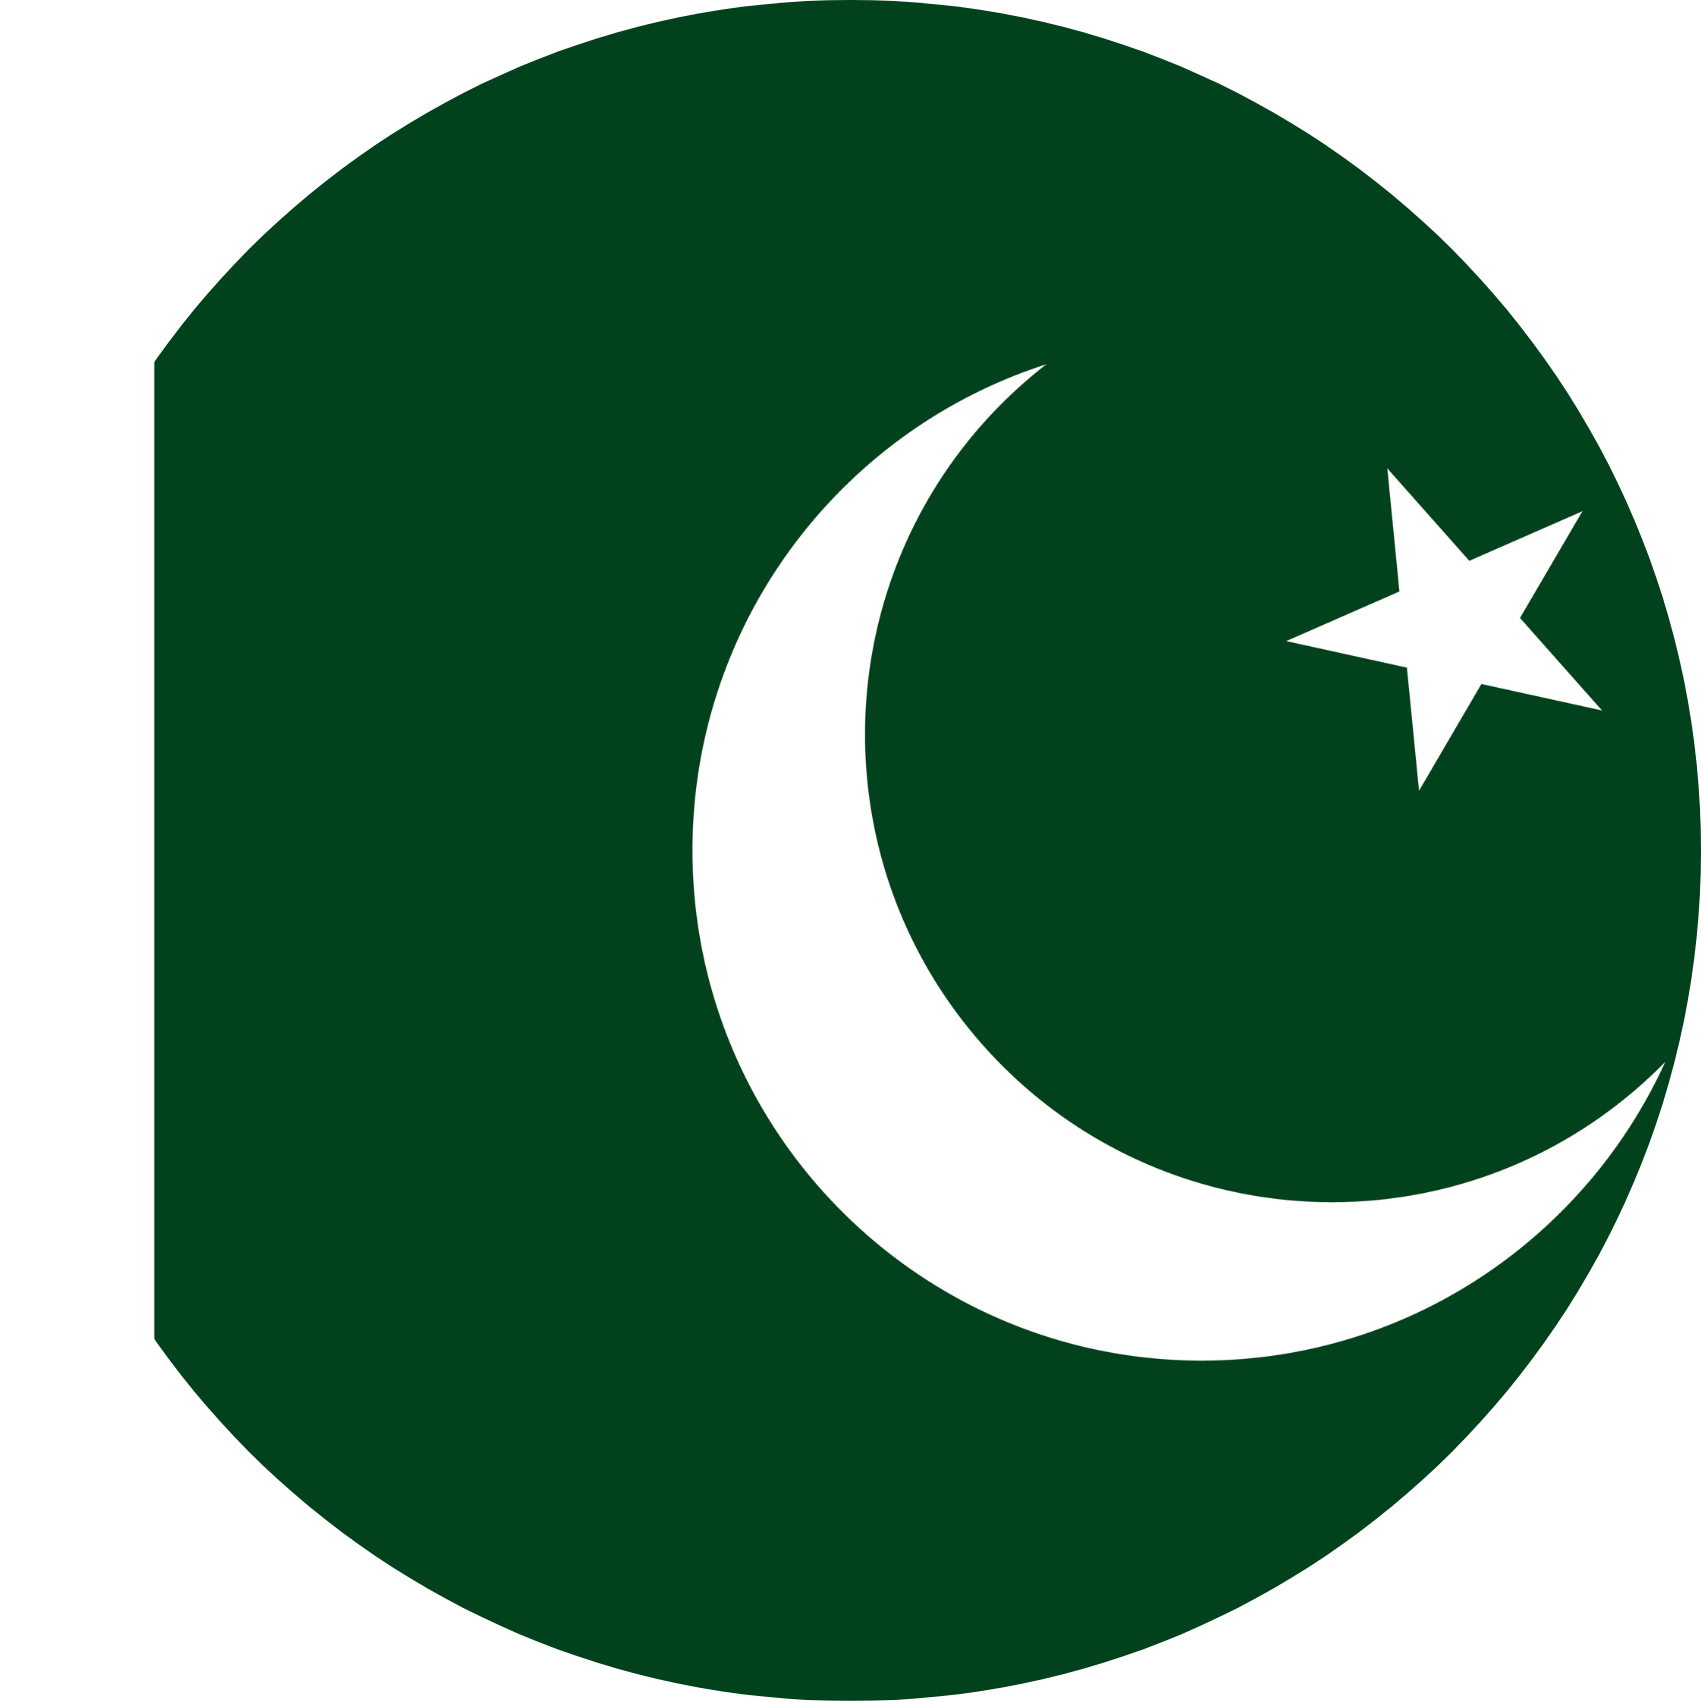 Pakistan flag in a circle